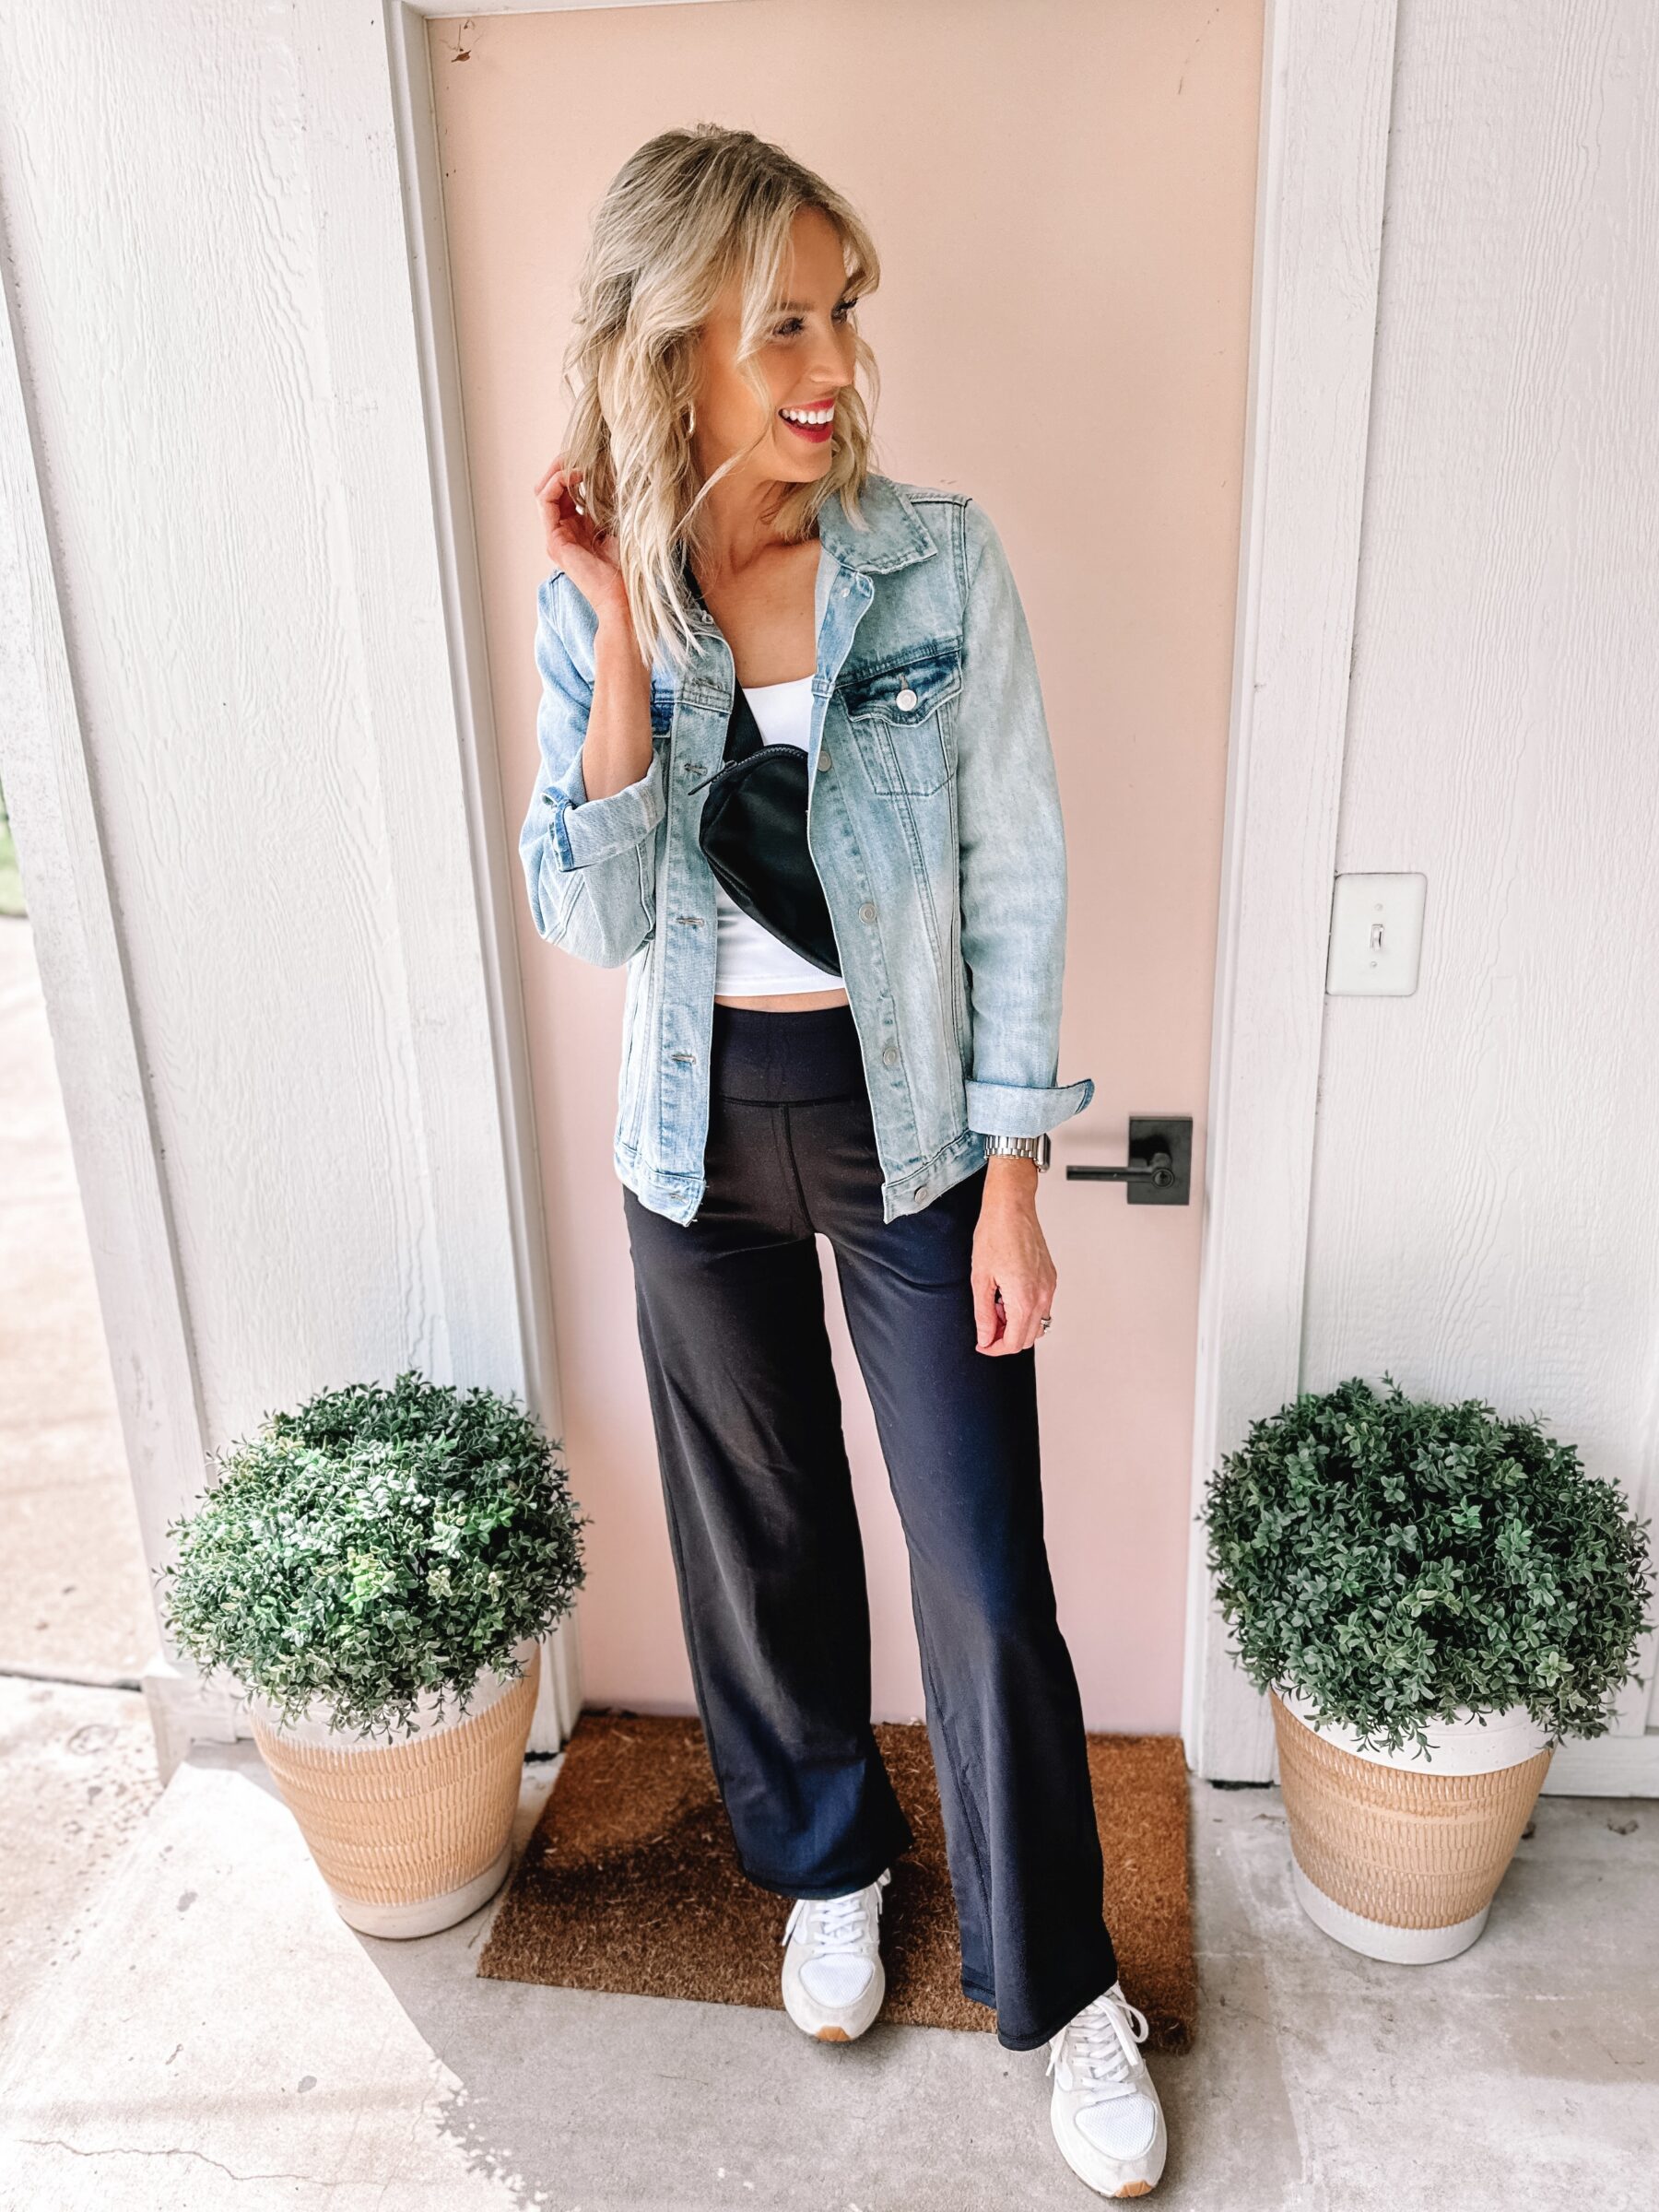 How to Style Wide Leg Lounge Pants For Women: The Ultimate Guide